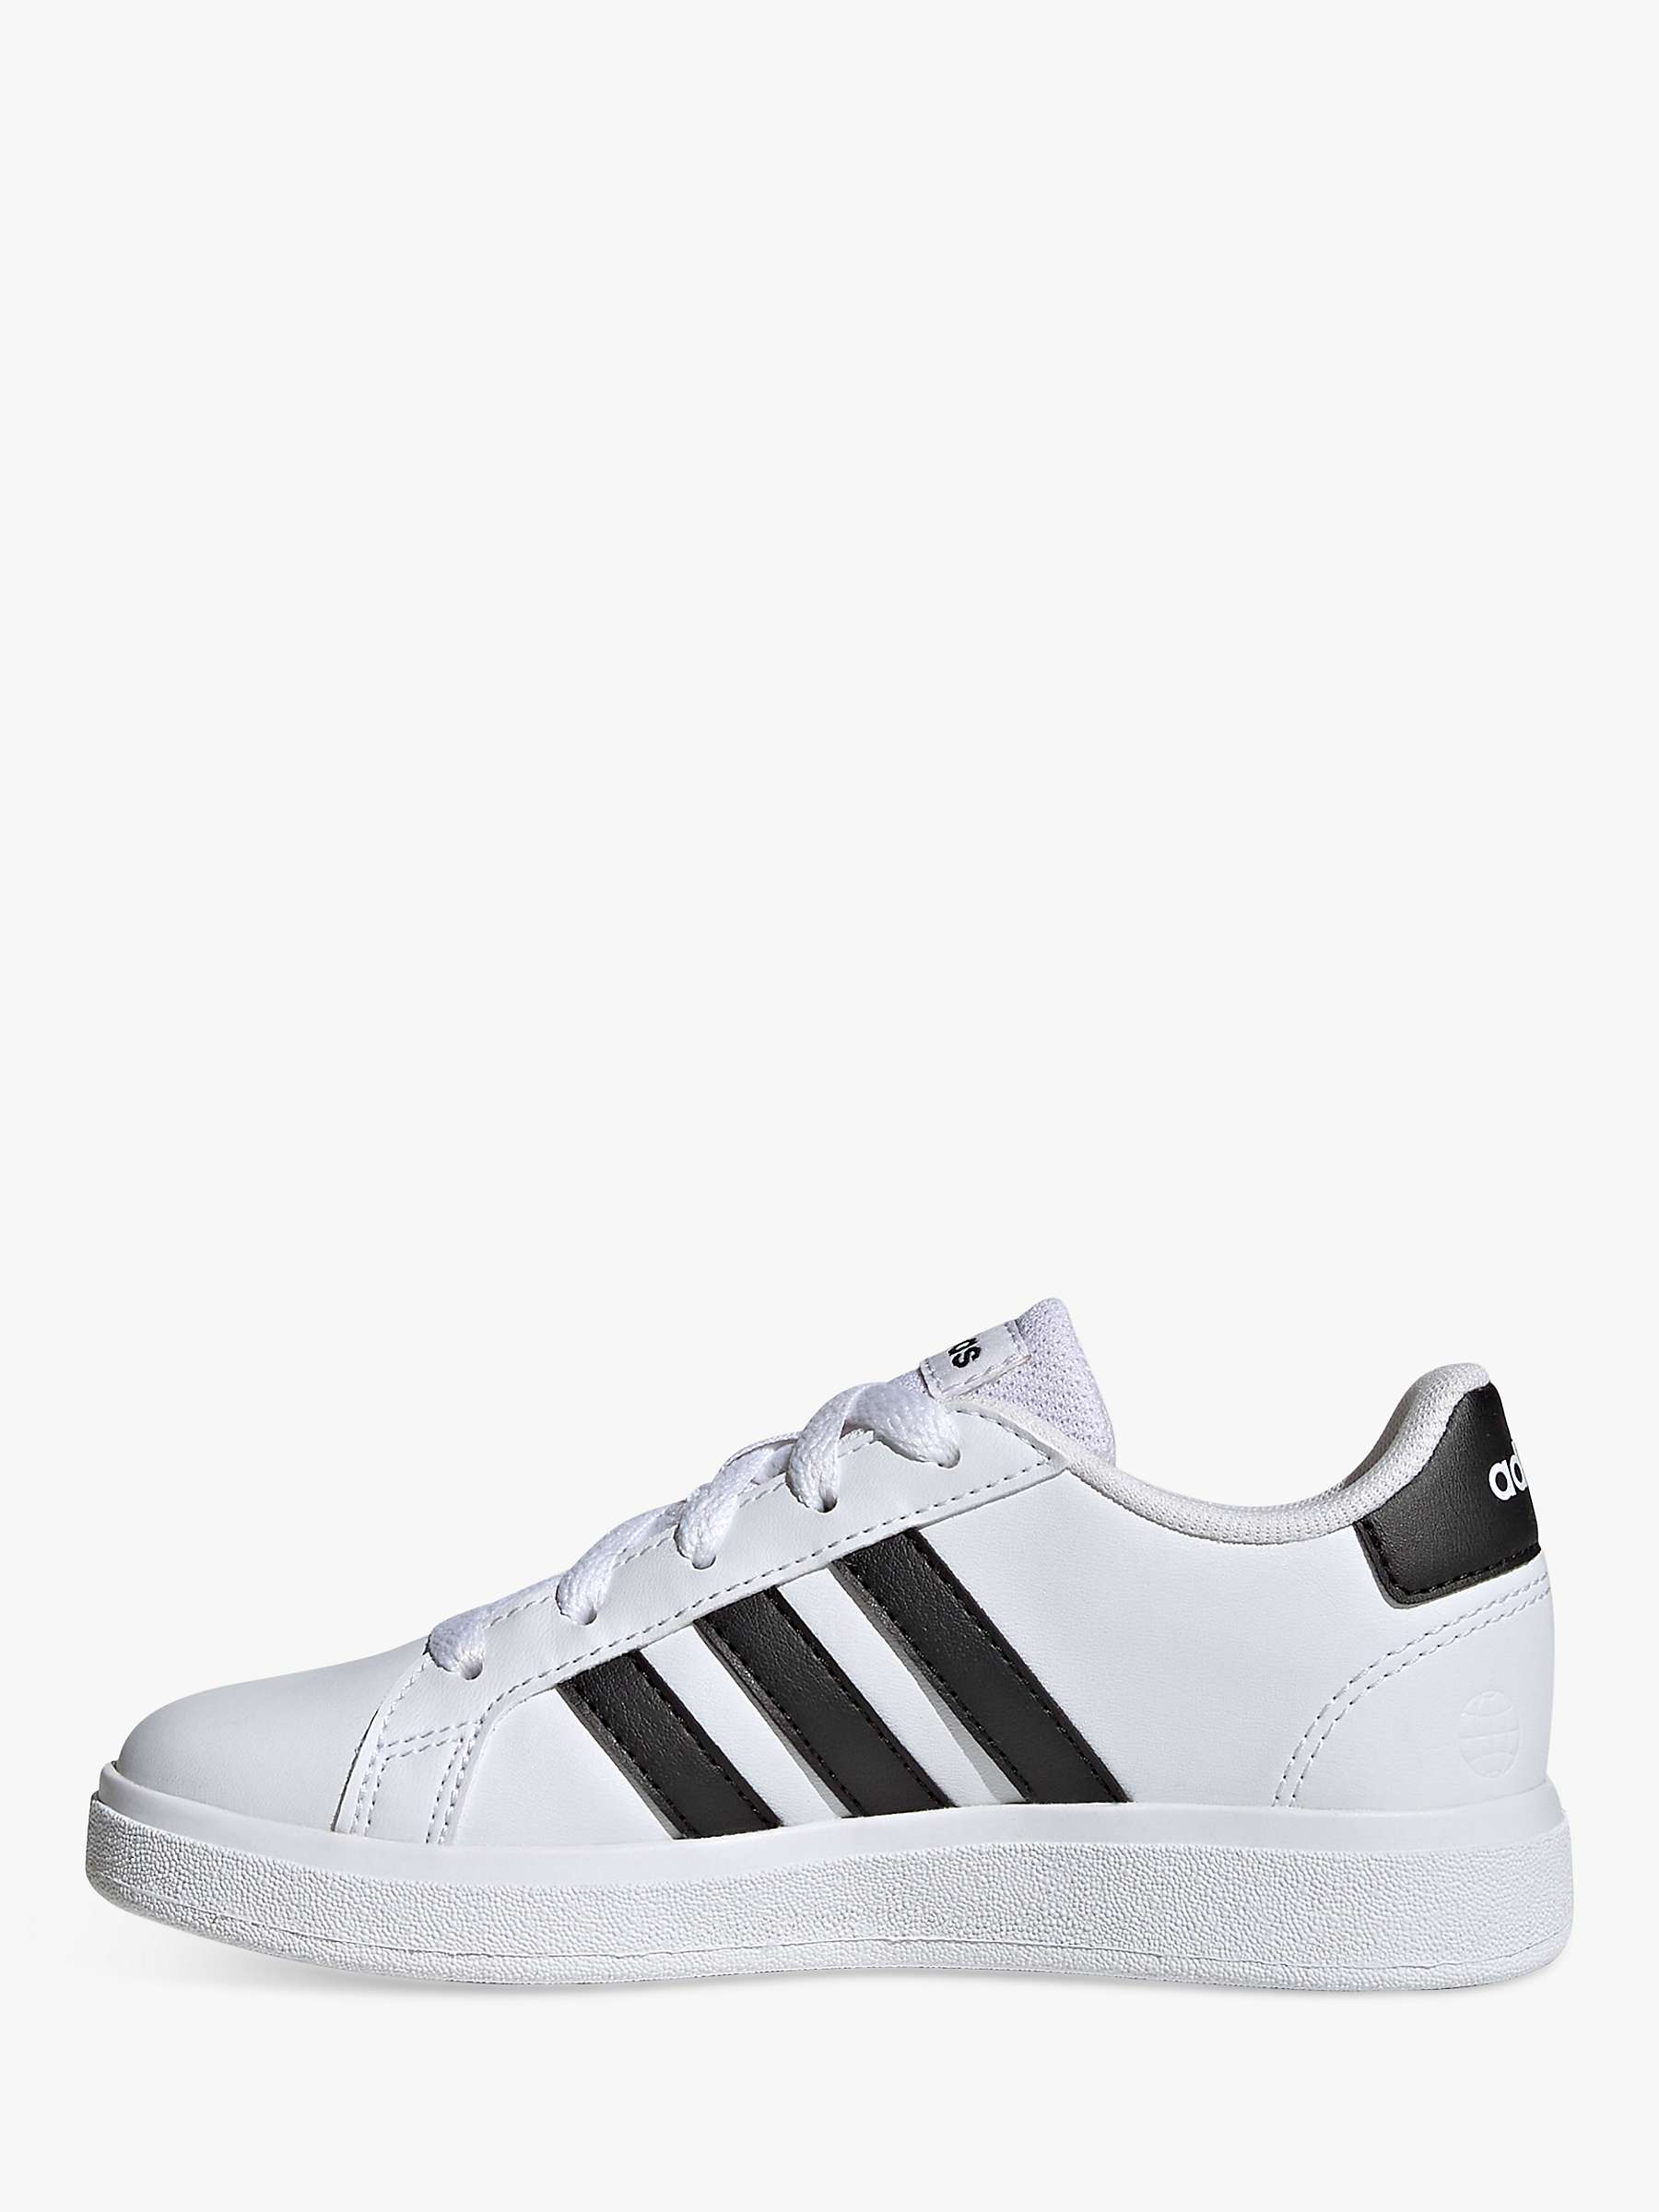 Buy adidas Kids' Grand Court 2.0 Trainers, White/Black Online at johnlewis.com